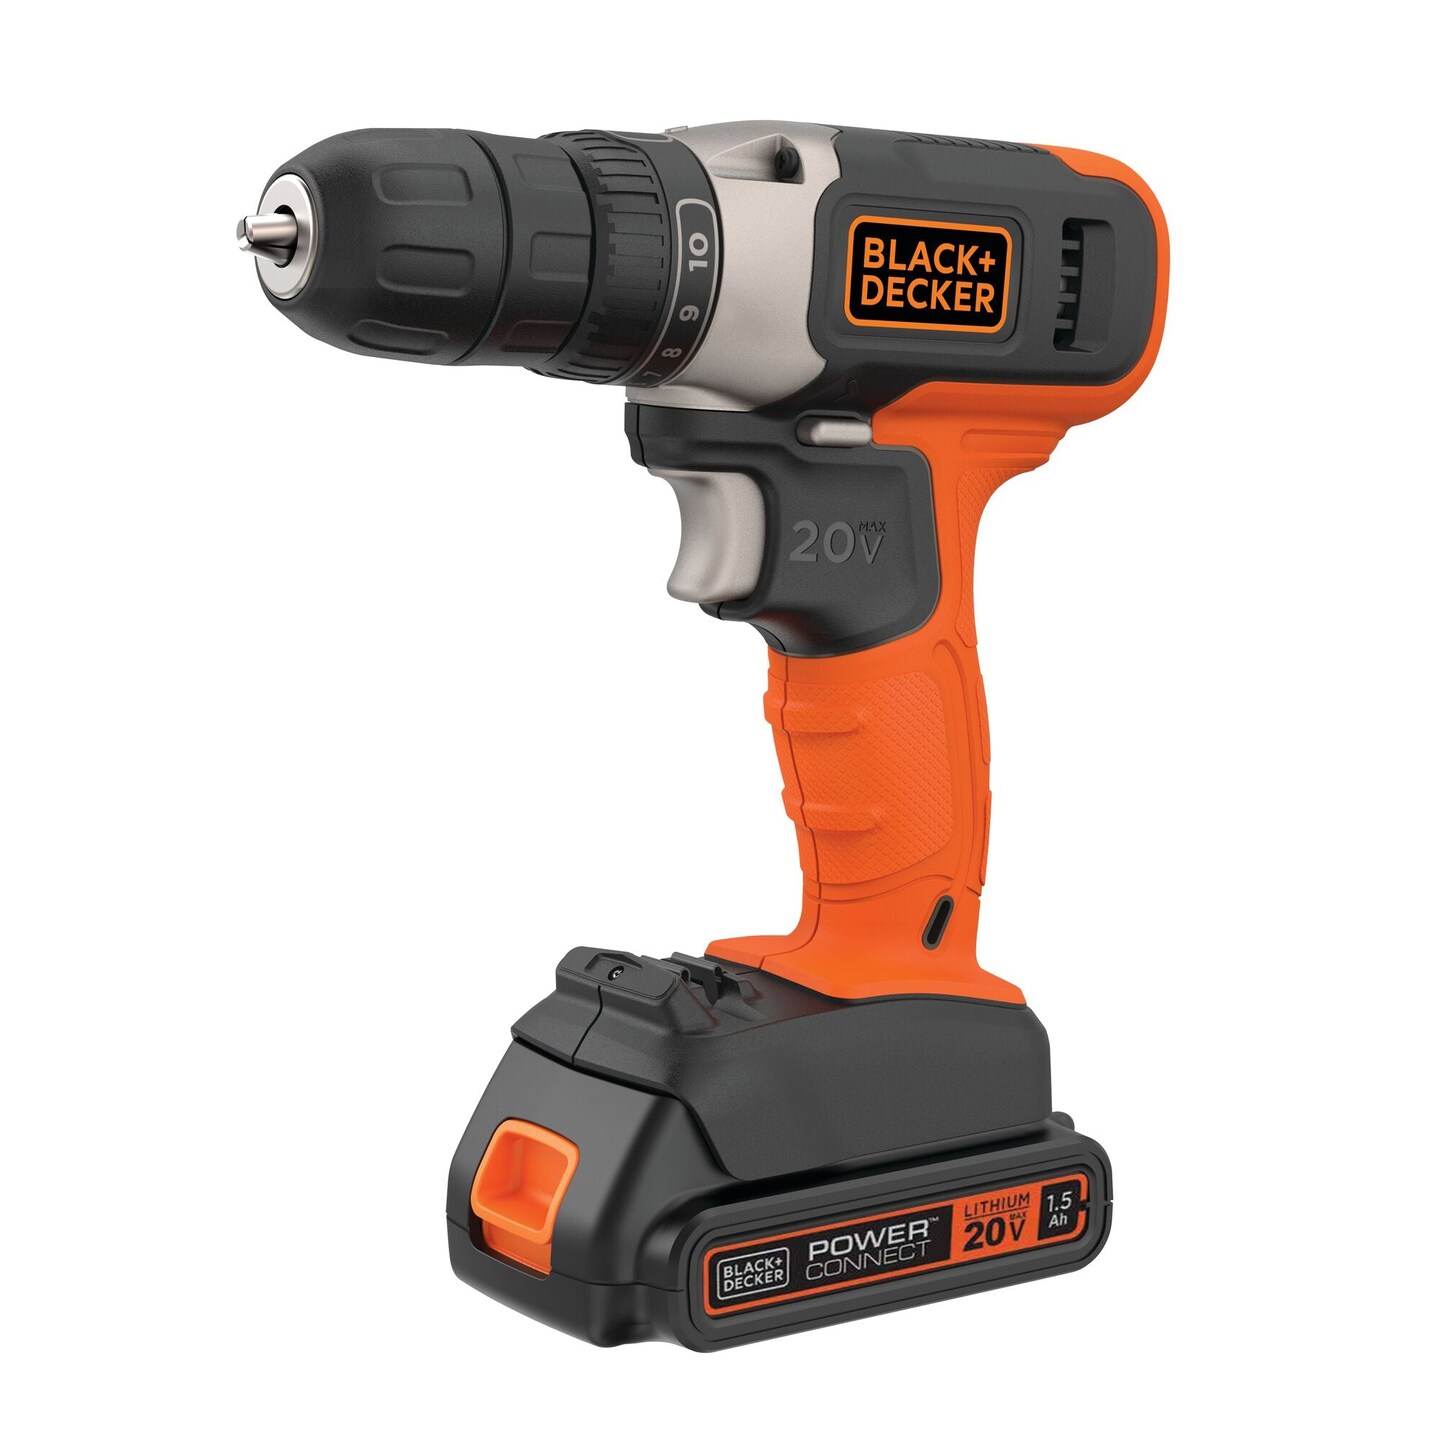 BLACK+DECKER 20V MAX* Cordless 3/8 in Drill Driver Kit (1) Lithium Ion Battery with Charger